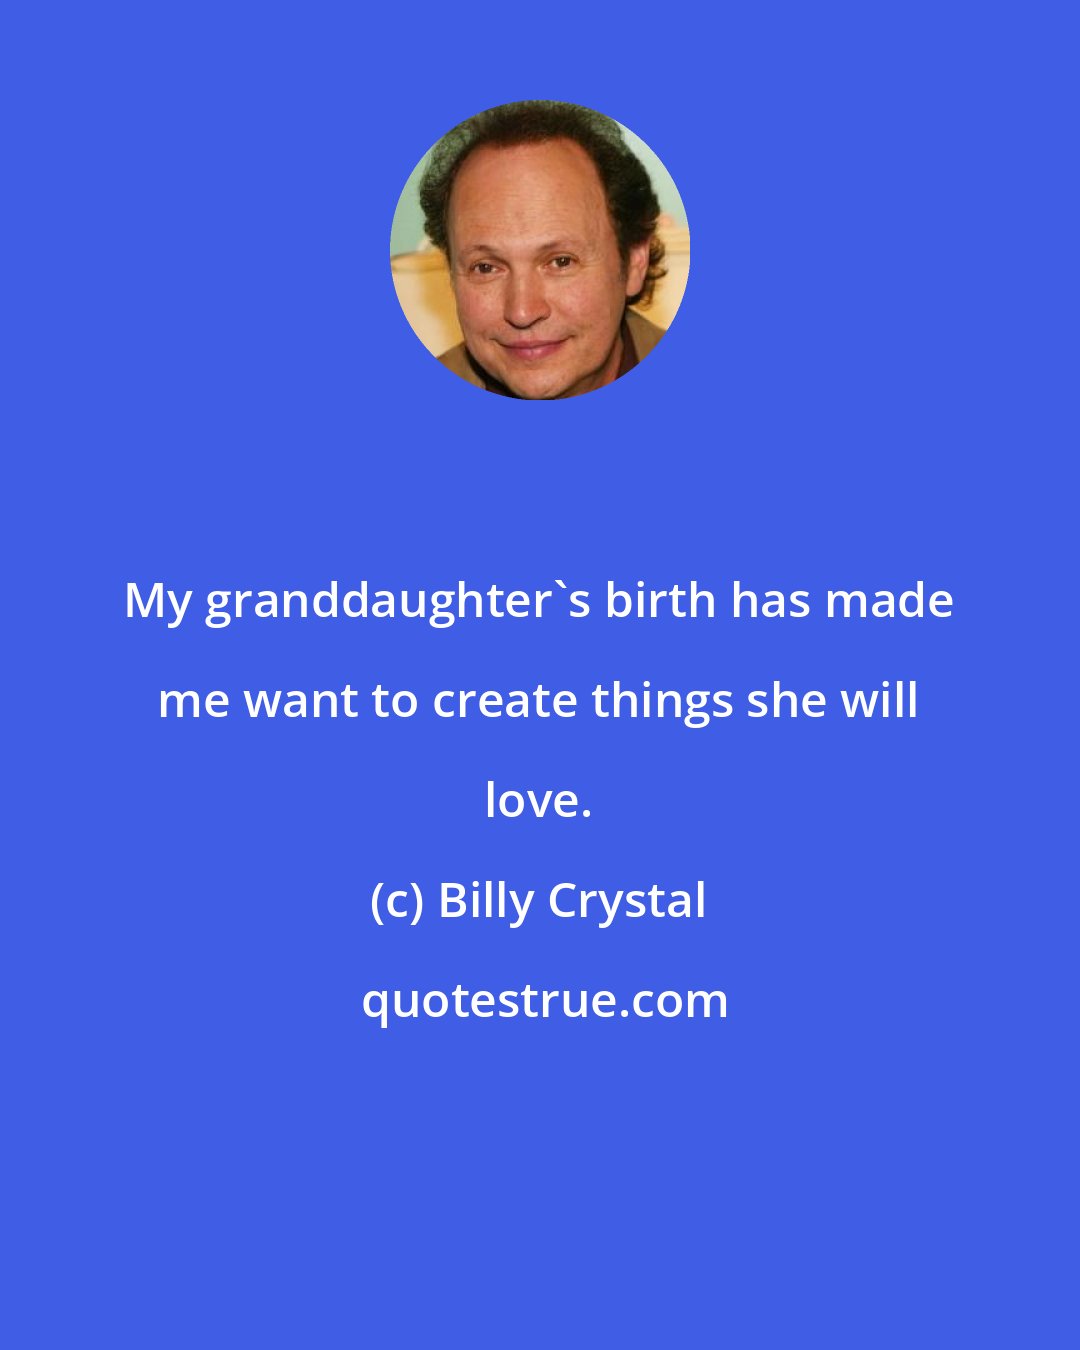 Billy Crystal: My granddaughter's birth has made me want to create things she will love.